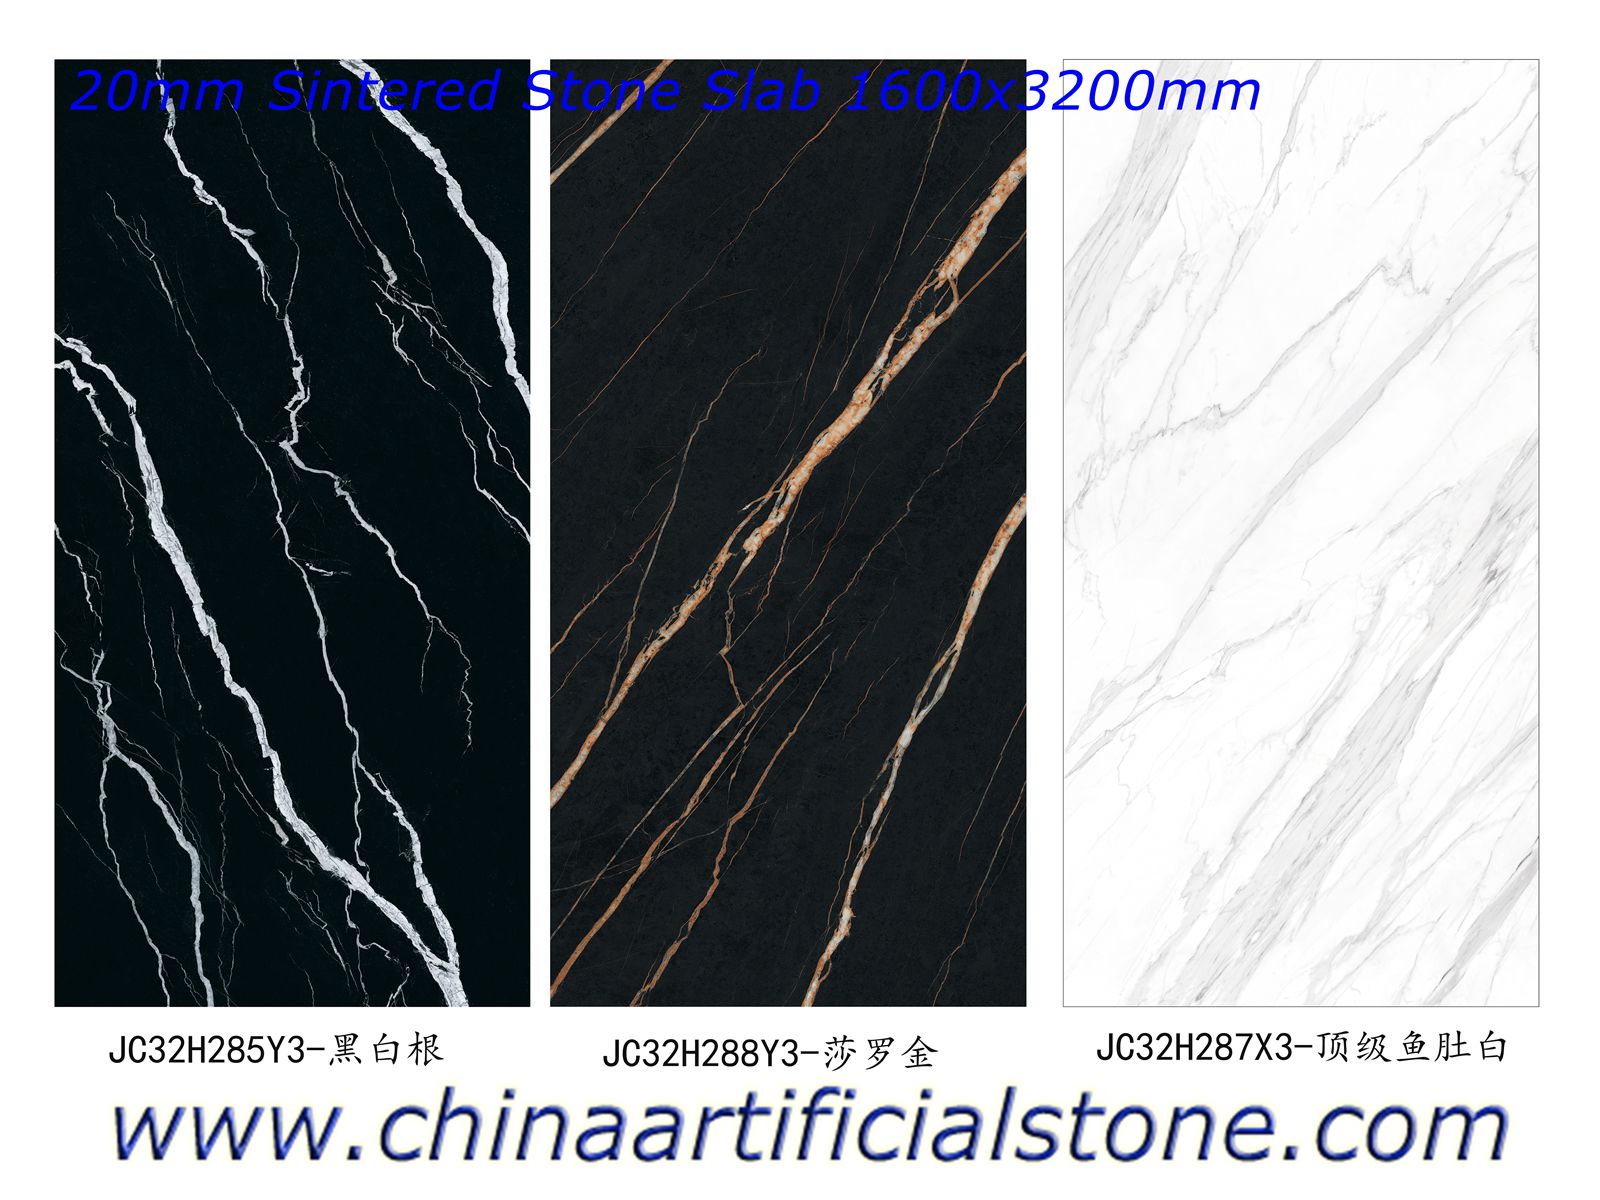 20mm Sintered Stone Marble Slabs 1600x3200mm 